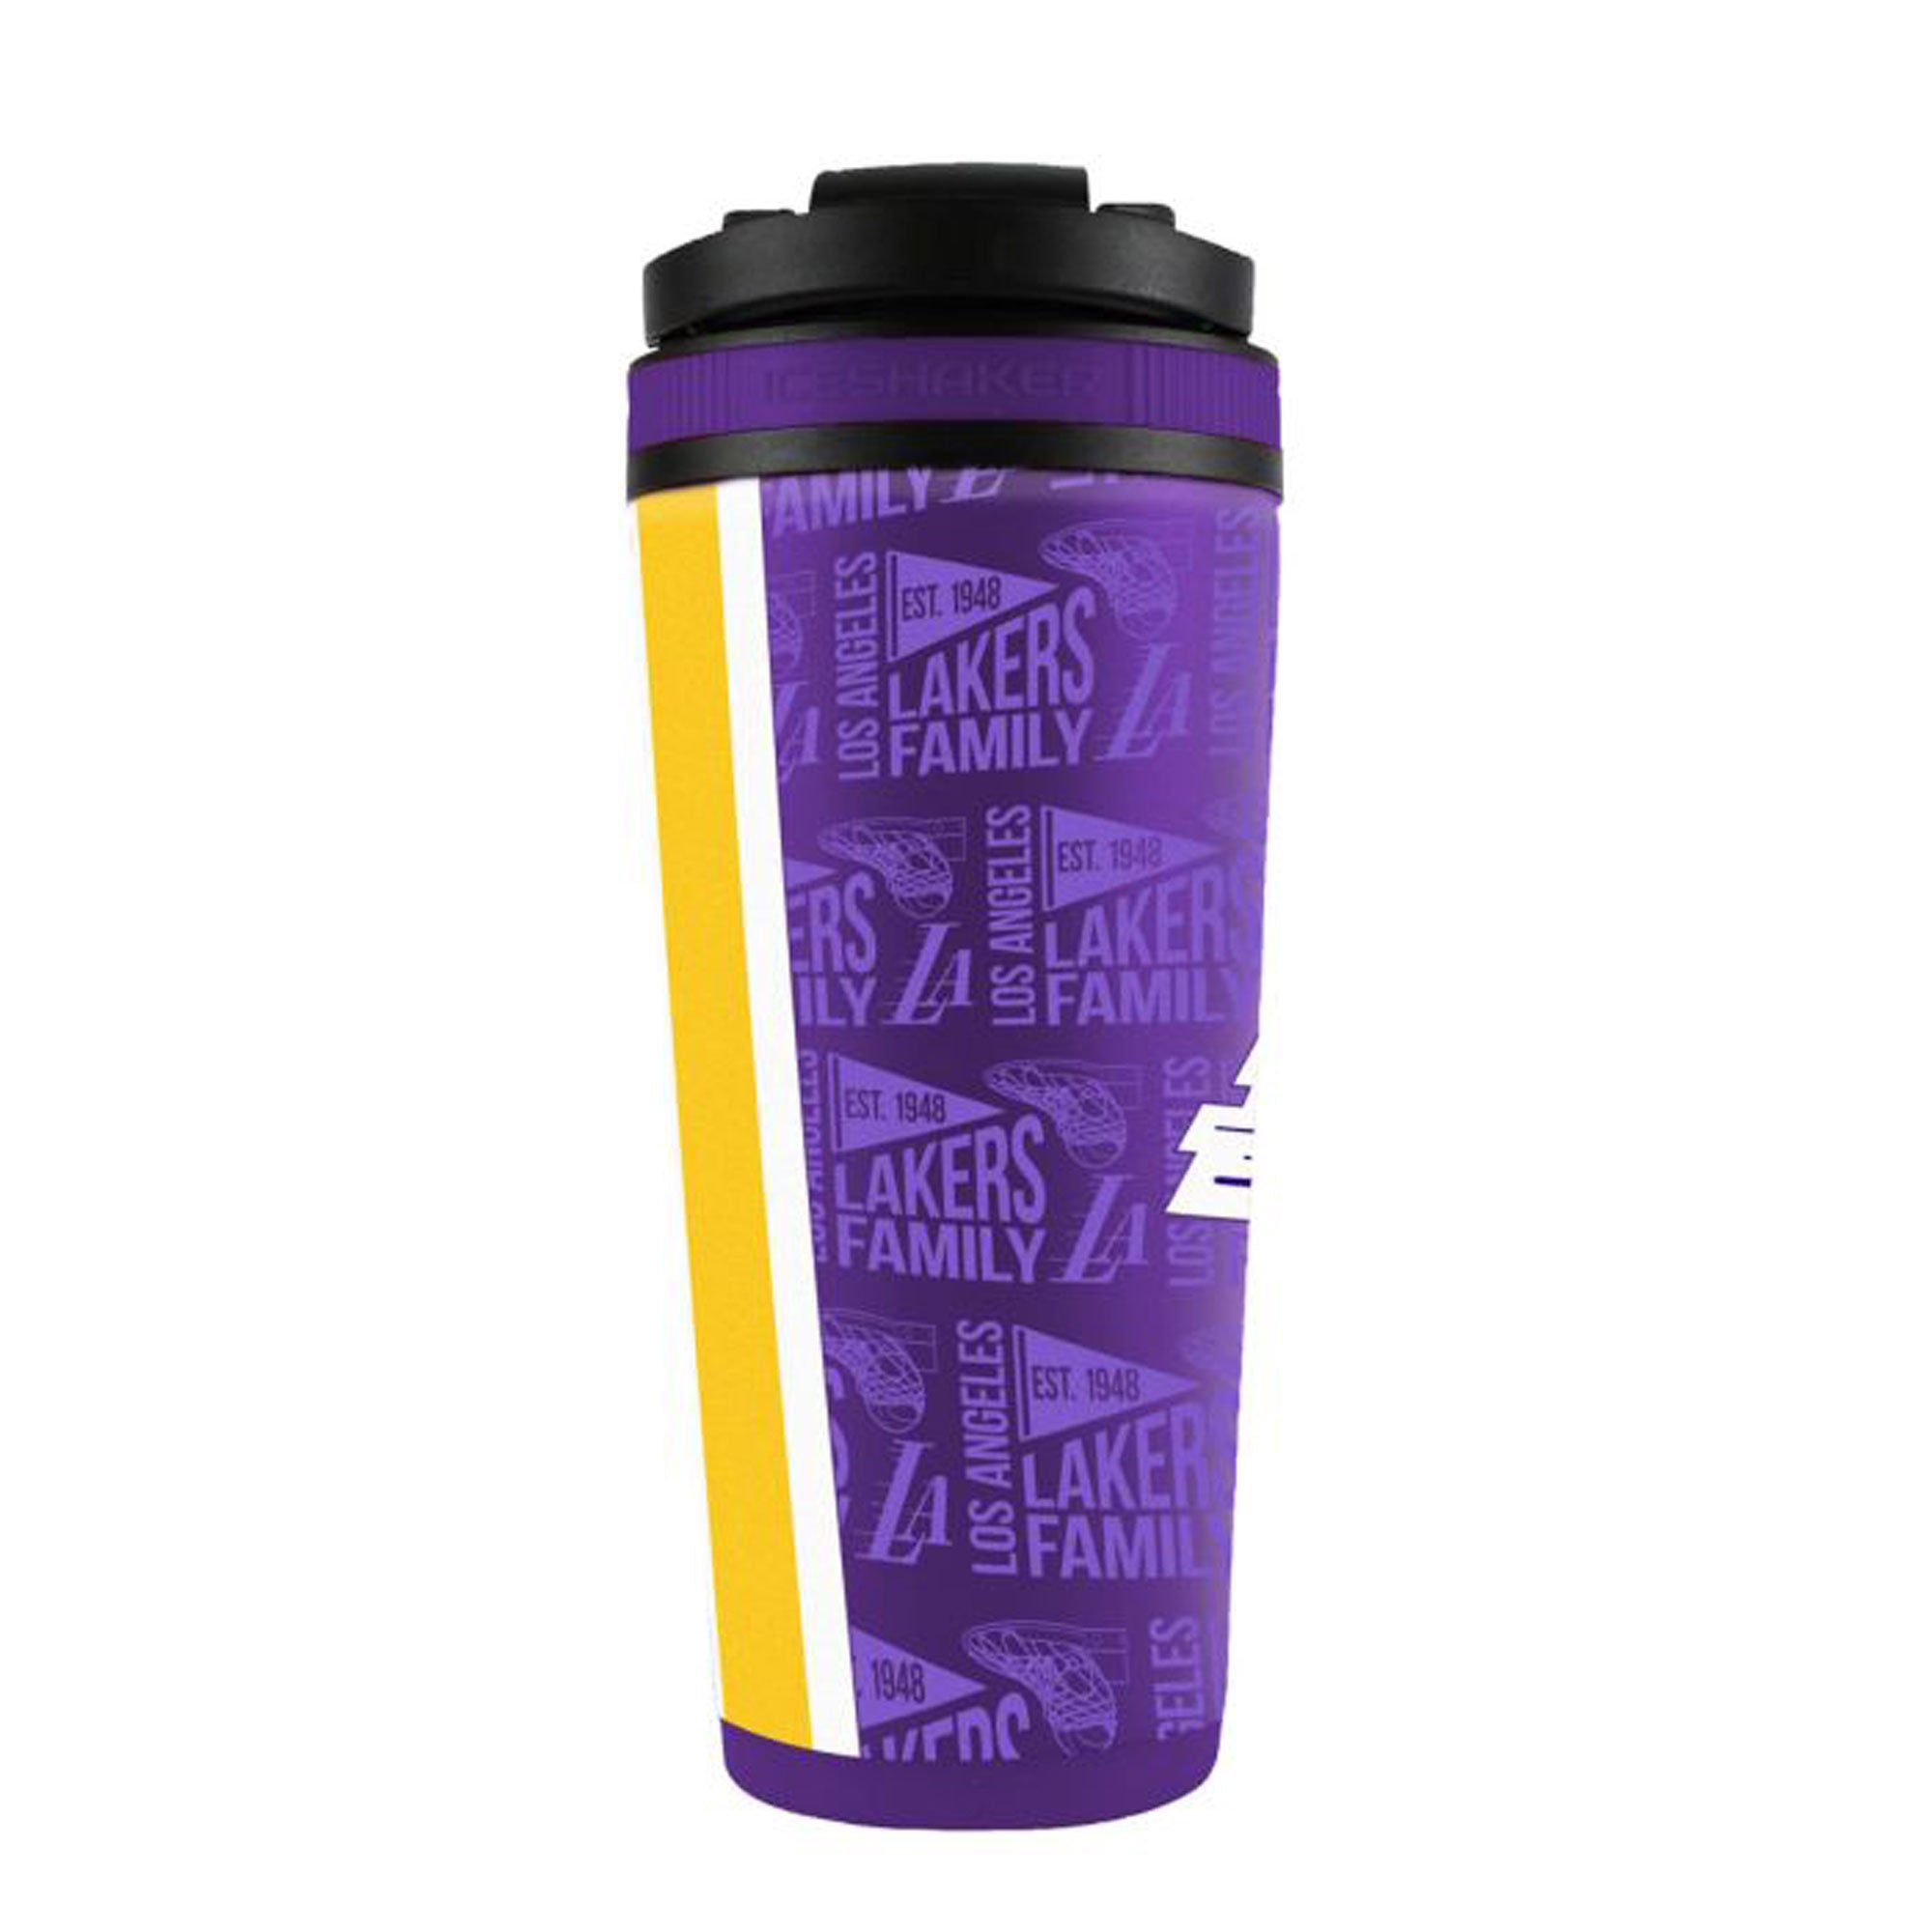 Officially Licensed Los Angeles Lakers 4D Ice Shaker